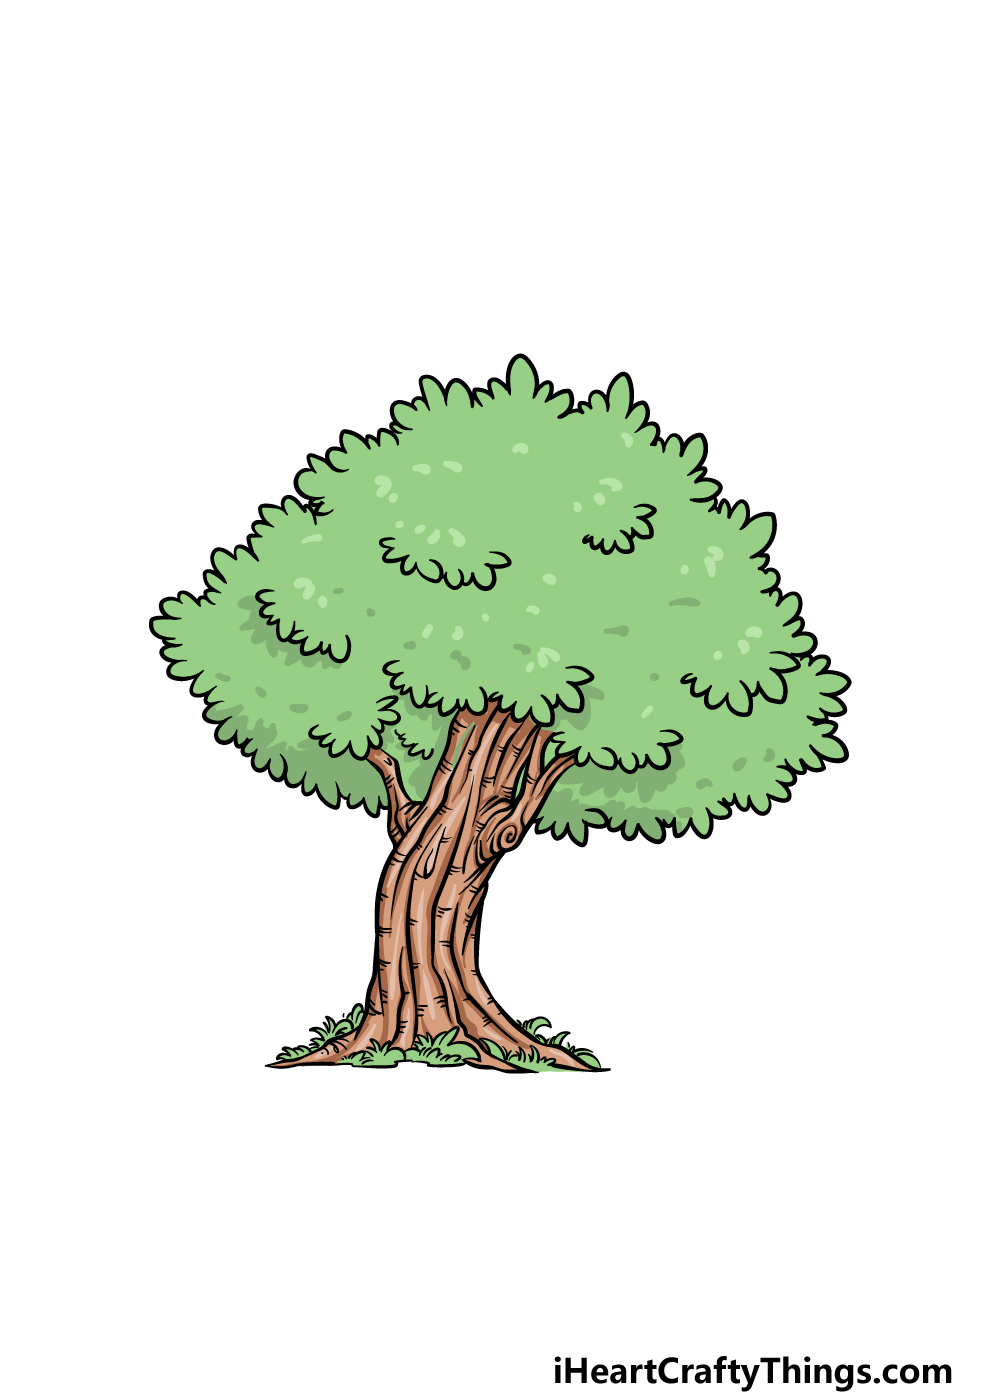 How To Draw An Oak Tree – A Step by Step Guide